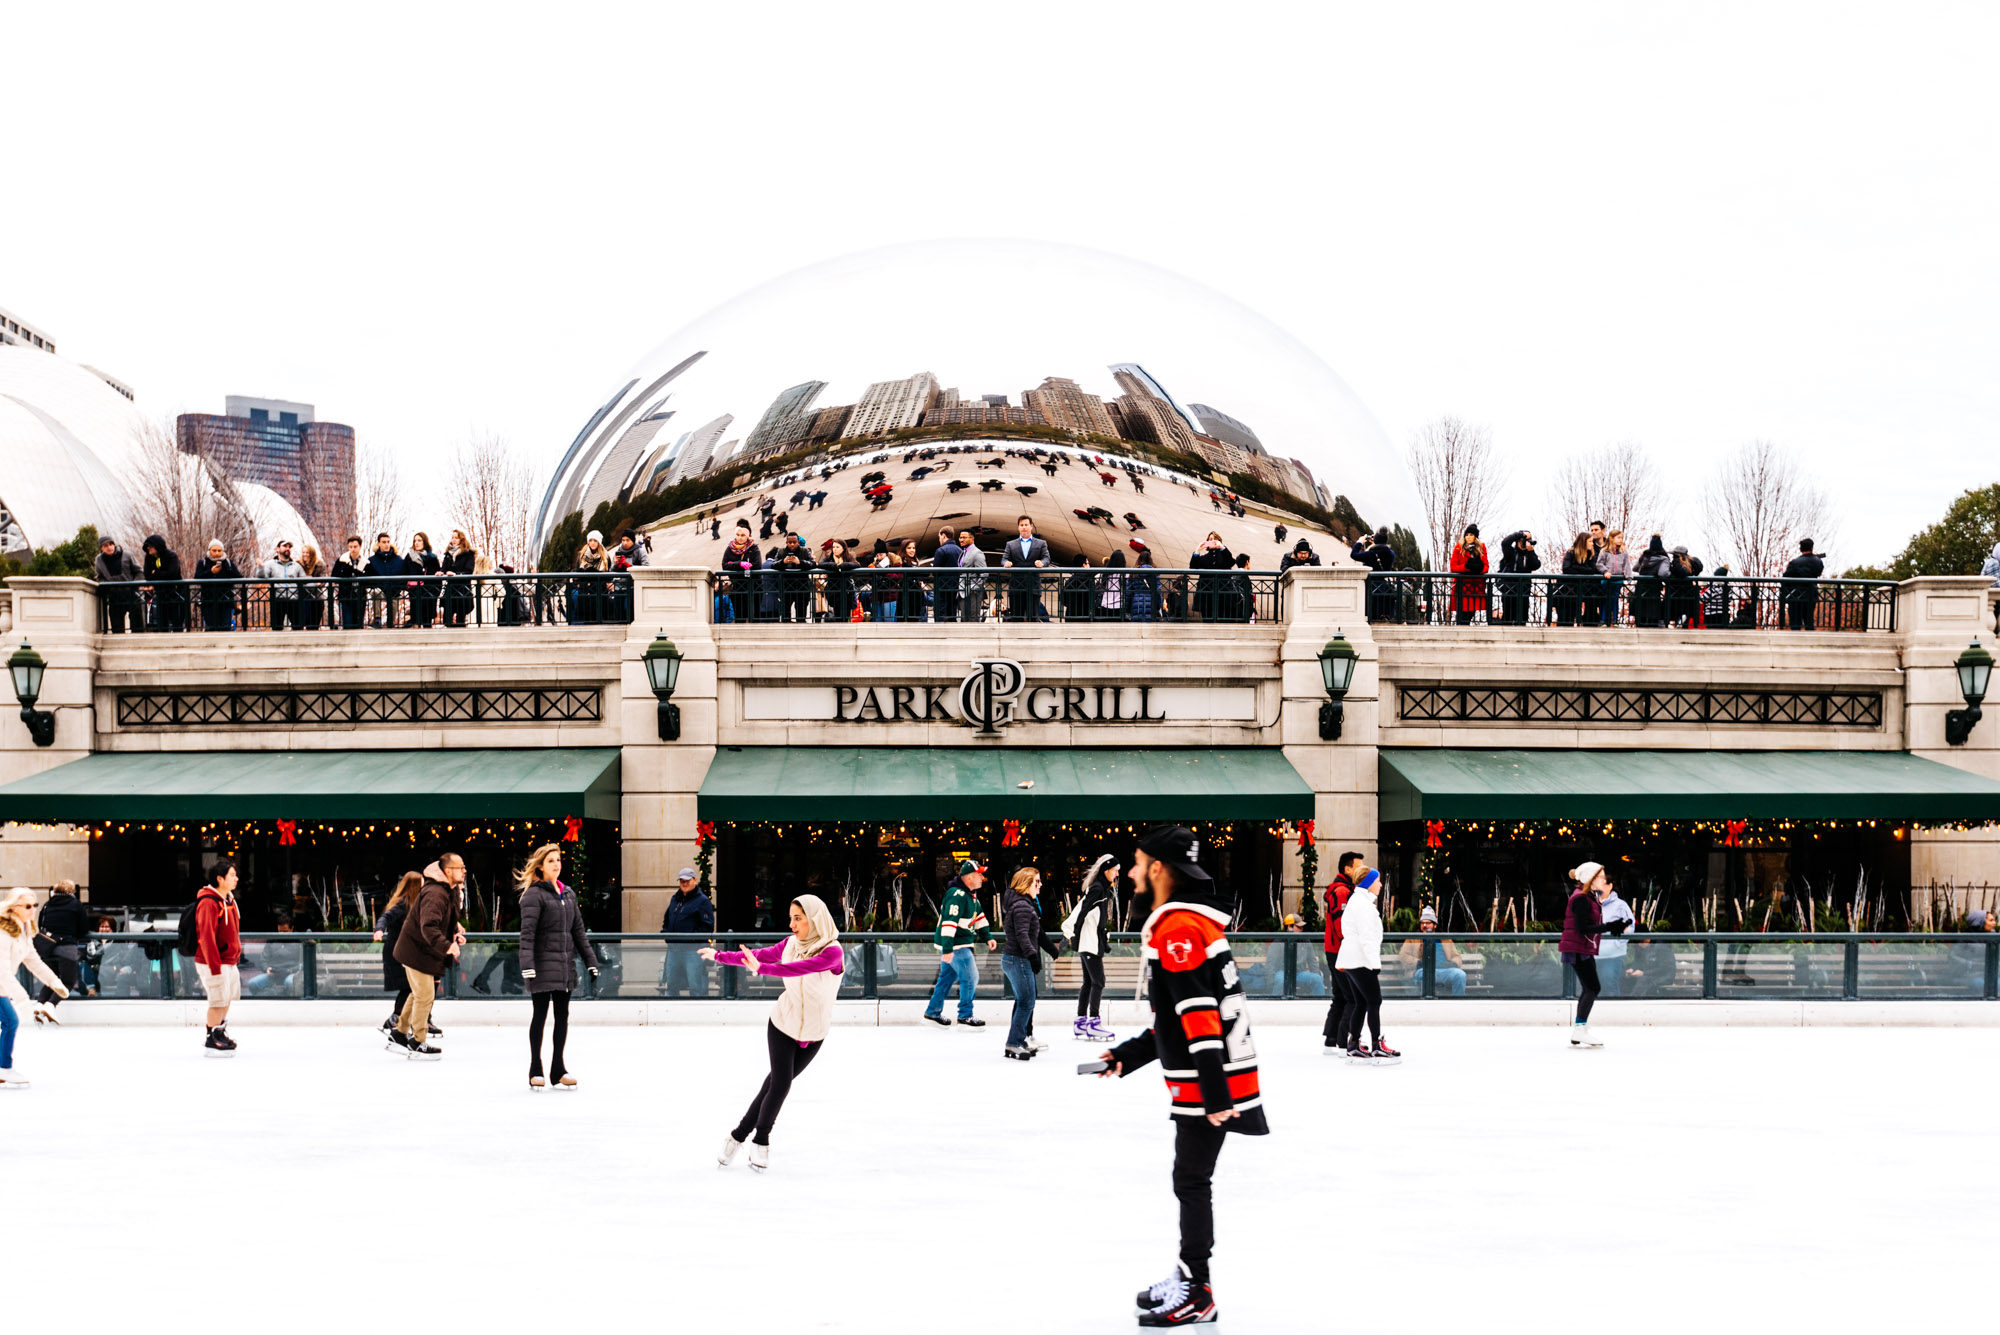 Jeff On The Road - Travel - Chicago - What to do - Millenium Park - Ice Skating Rink - All photos are under Copyright © 2017 Jeff Frenette Photography / dezjeff. To use the photos, please contact me at dezjeff@me.com.